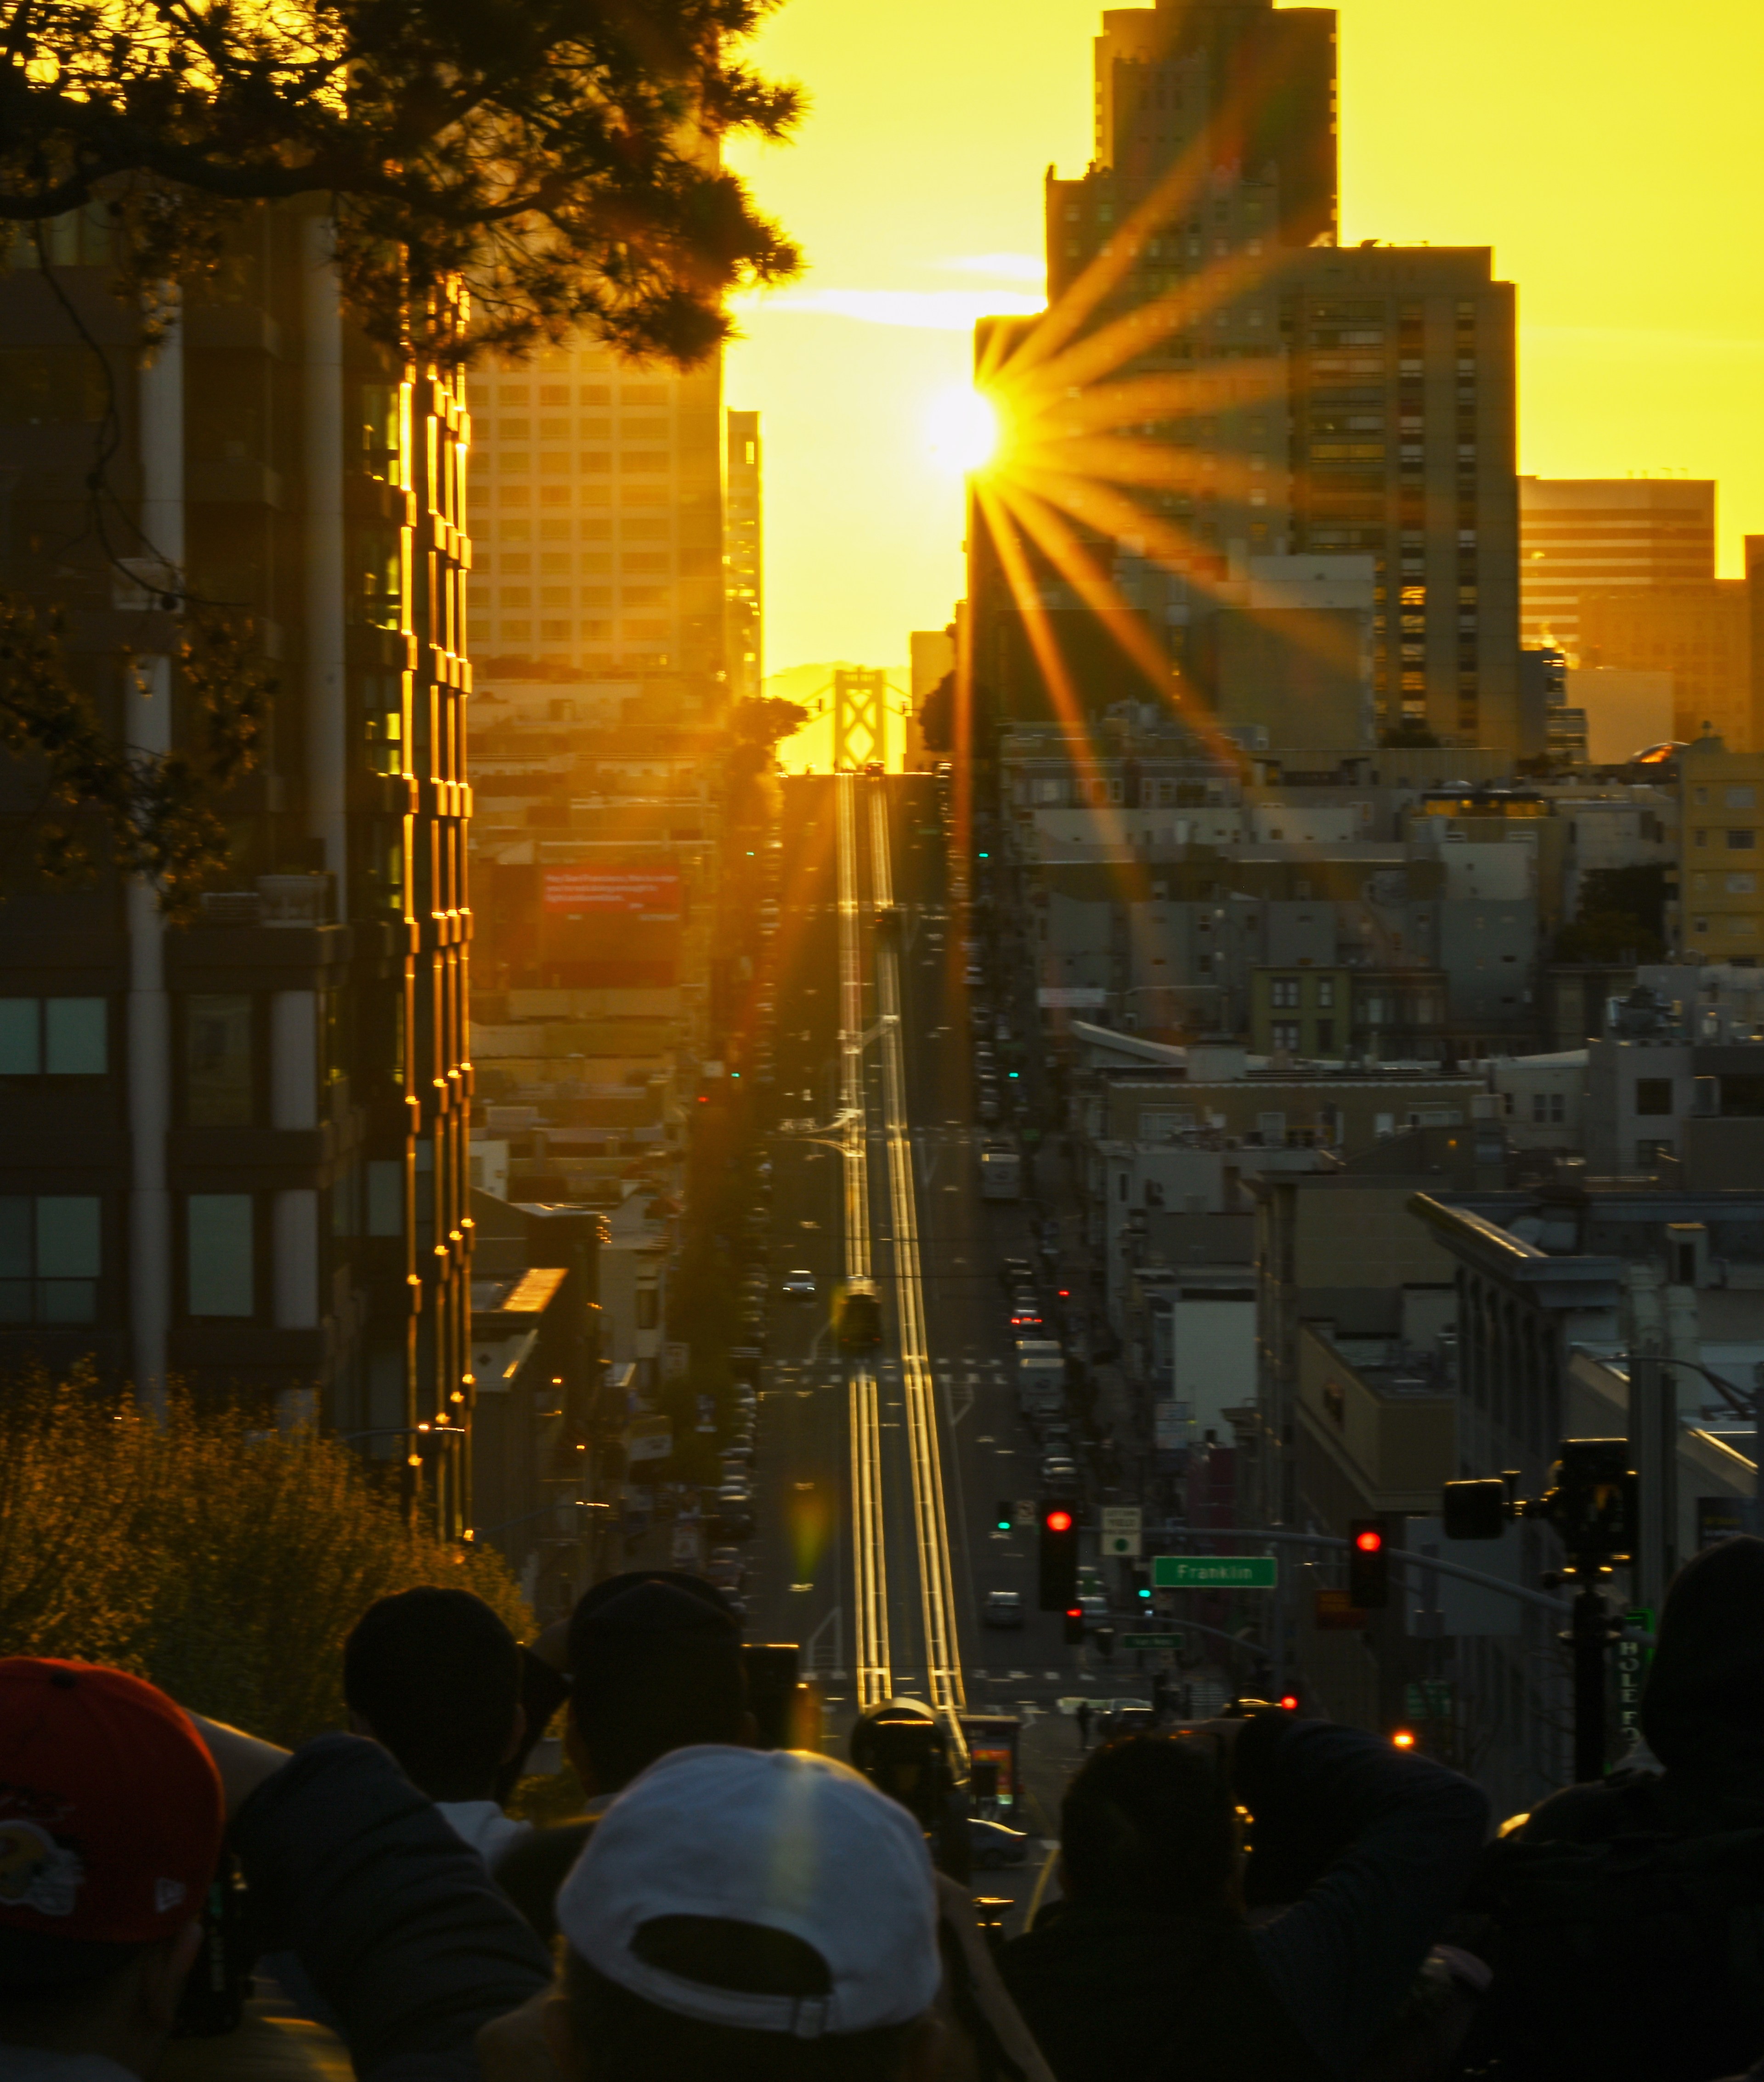 Sunset view down a steep city street, with the sun casting starburst rays between high-rise buildings. Crowds of people are observing the scene.